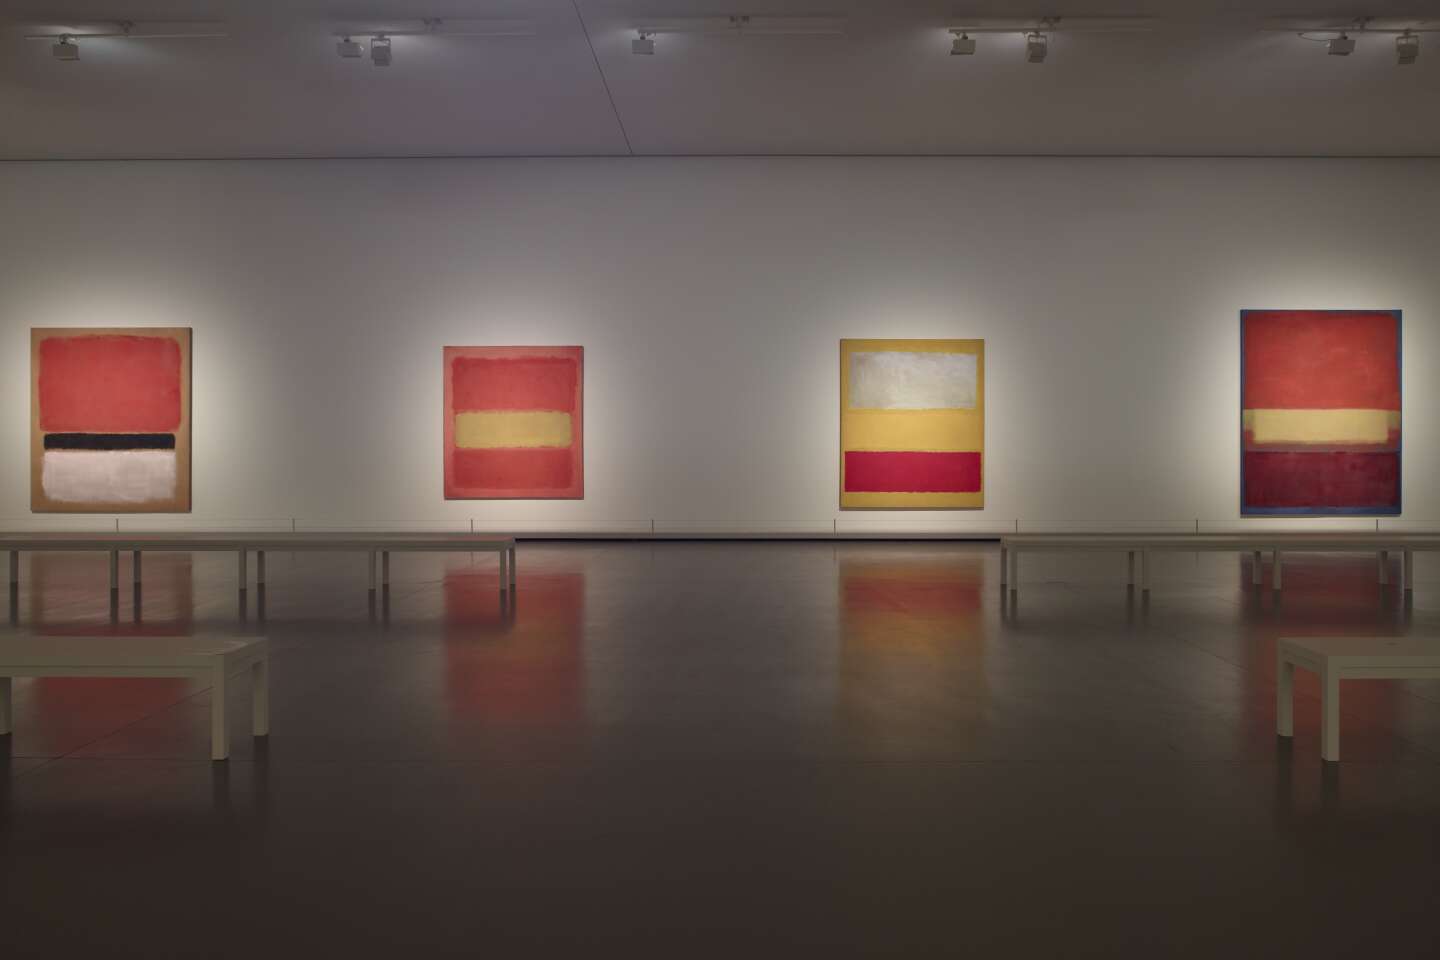 THE FONDATION LOUIS VUITTON DISPLAYS 115 WORKS OF MARK ROTHKO IN